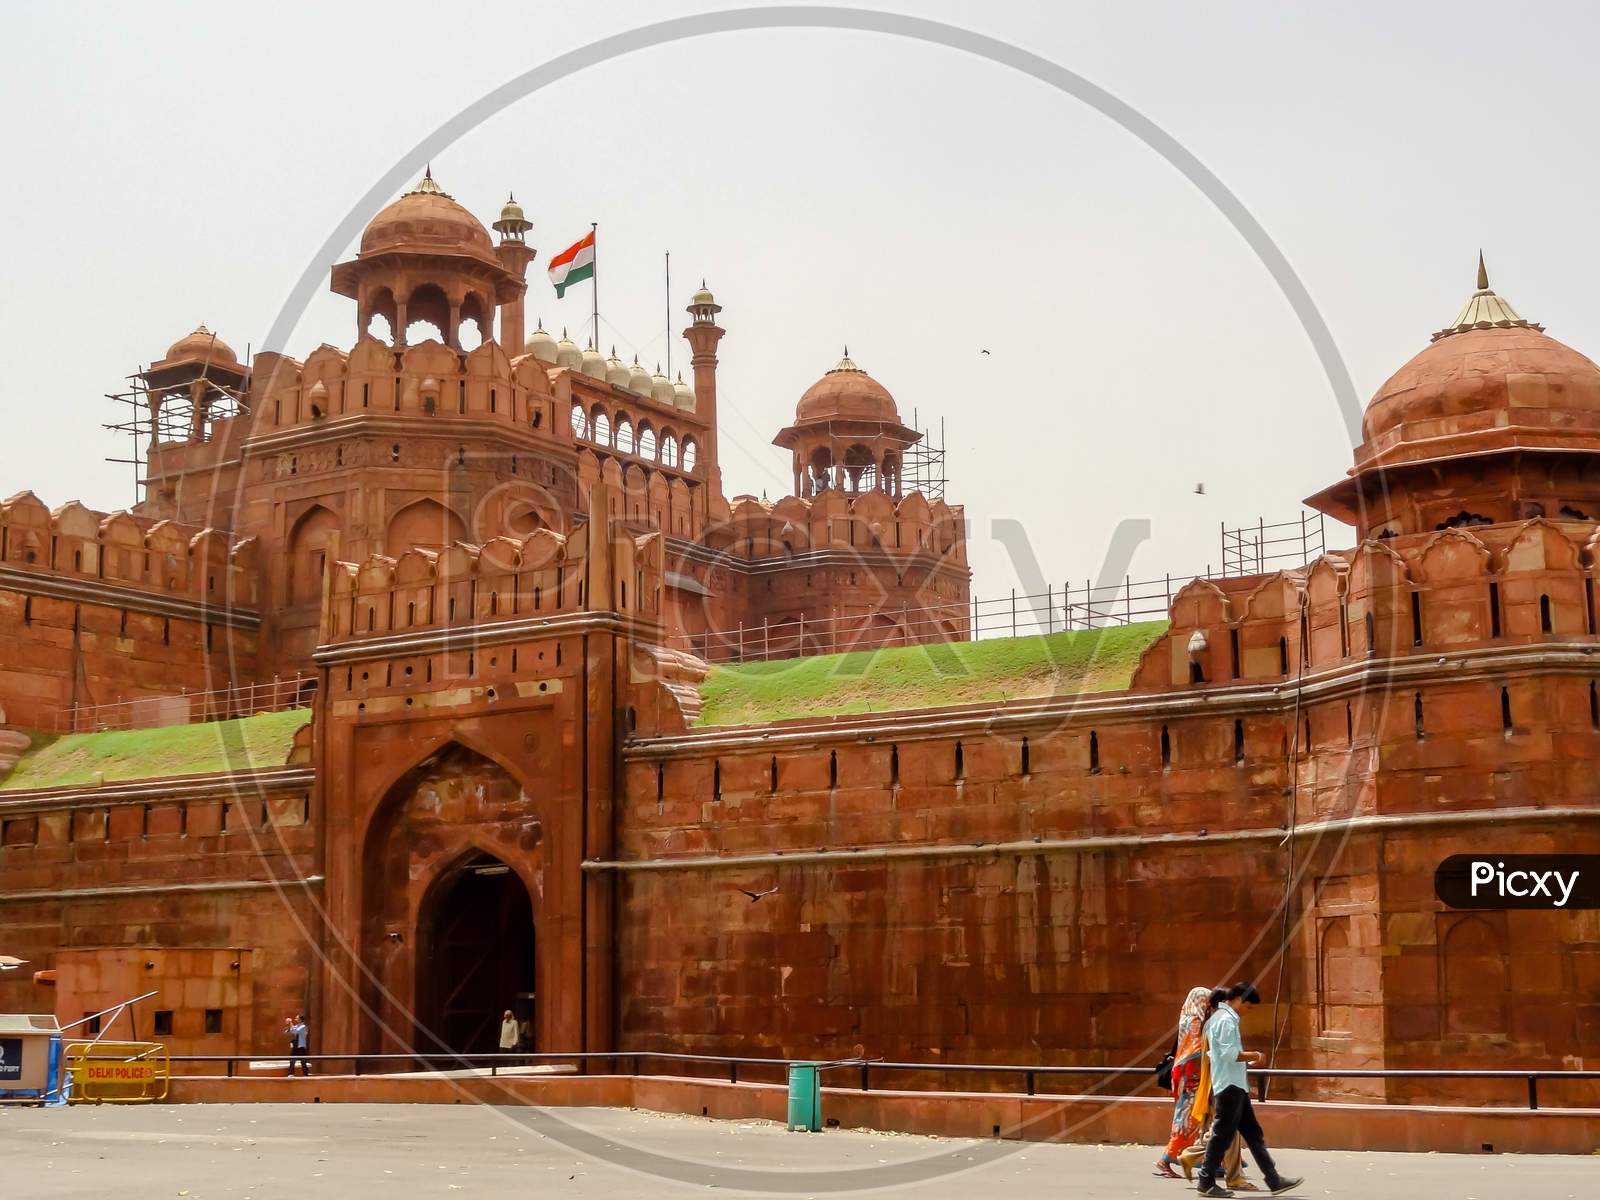 The Red Fort is a historical fort in the city of Delhi in India. Inside view of the Red Fort of Delhi.